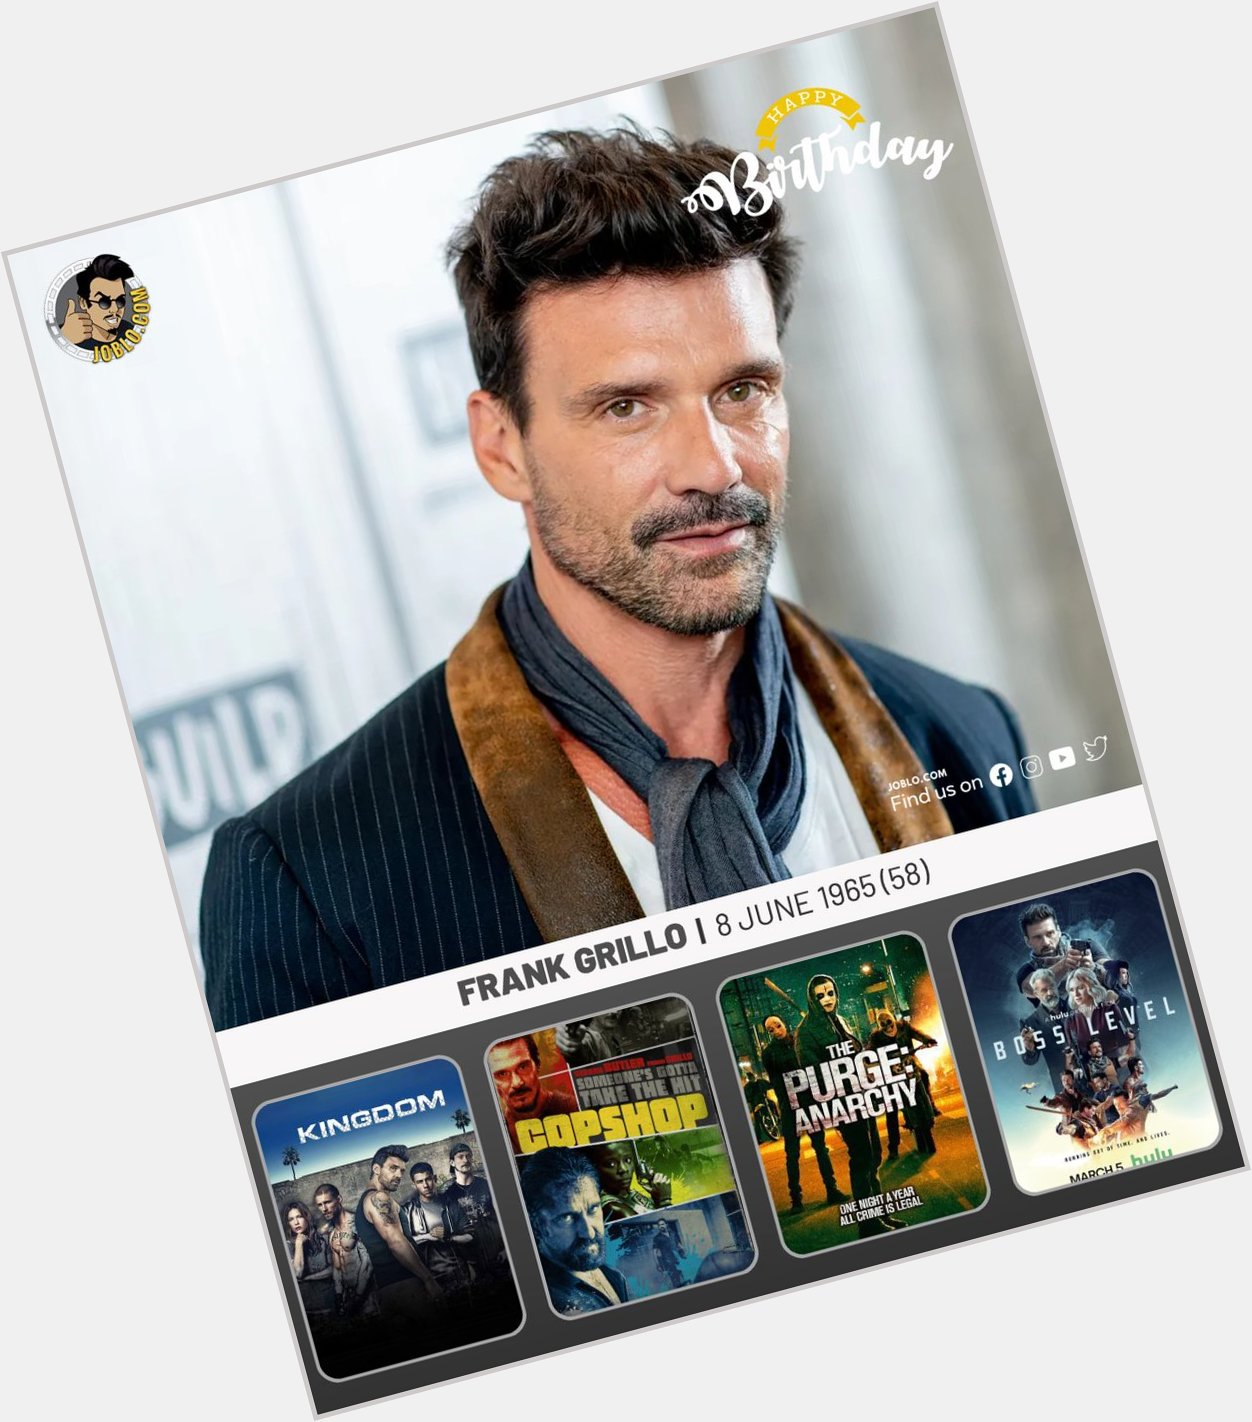 Happy birthday to Frank Grillo, who turns 58 today!    